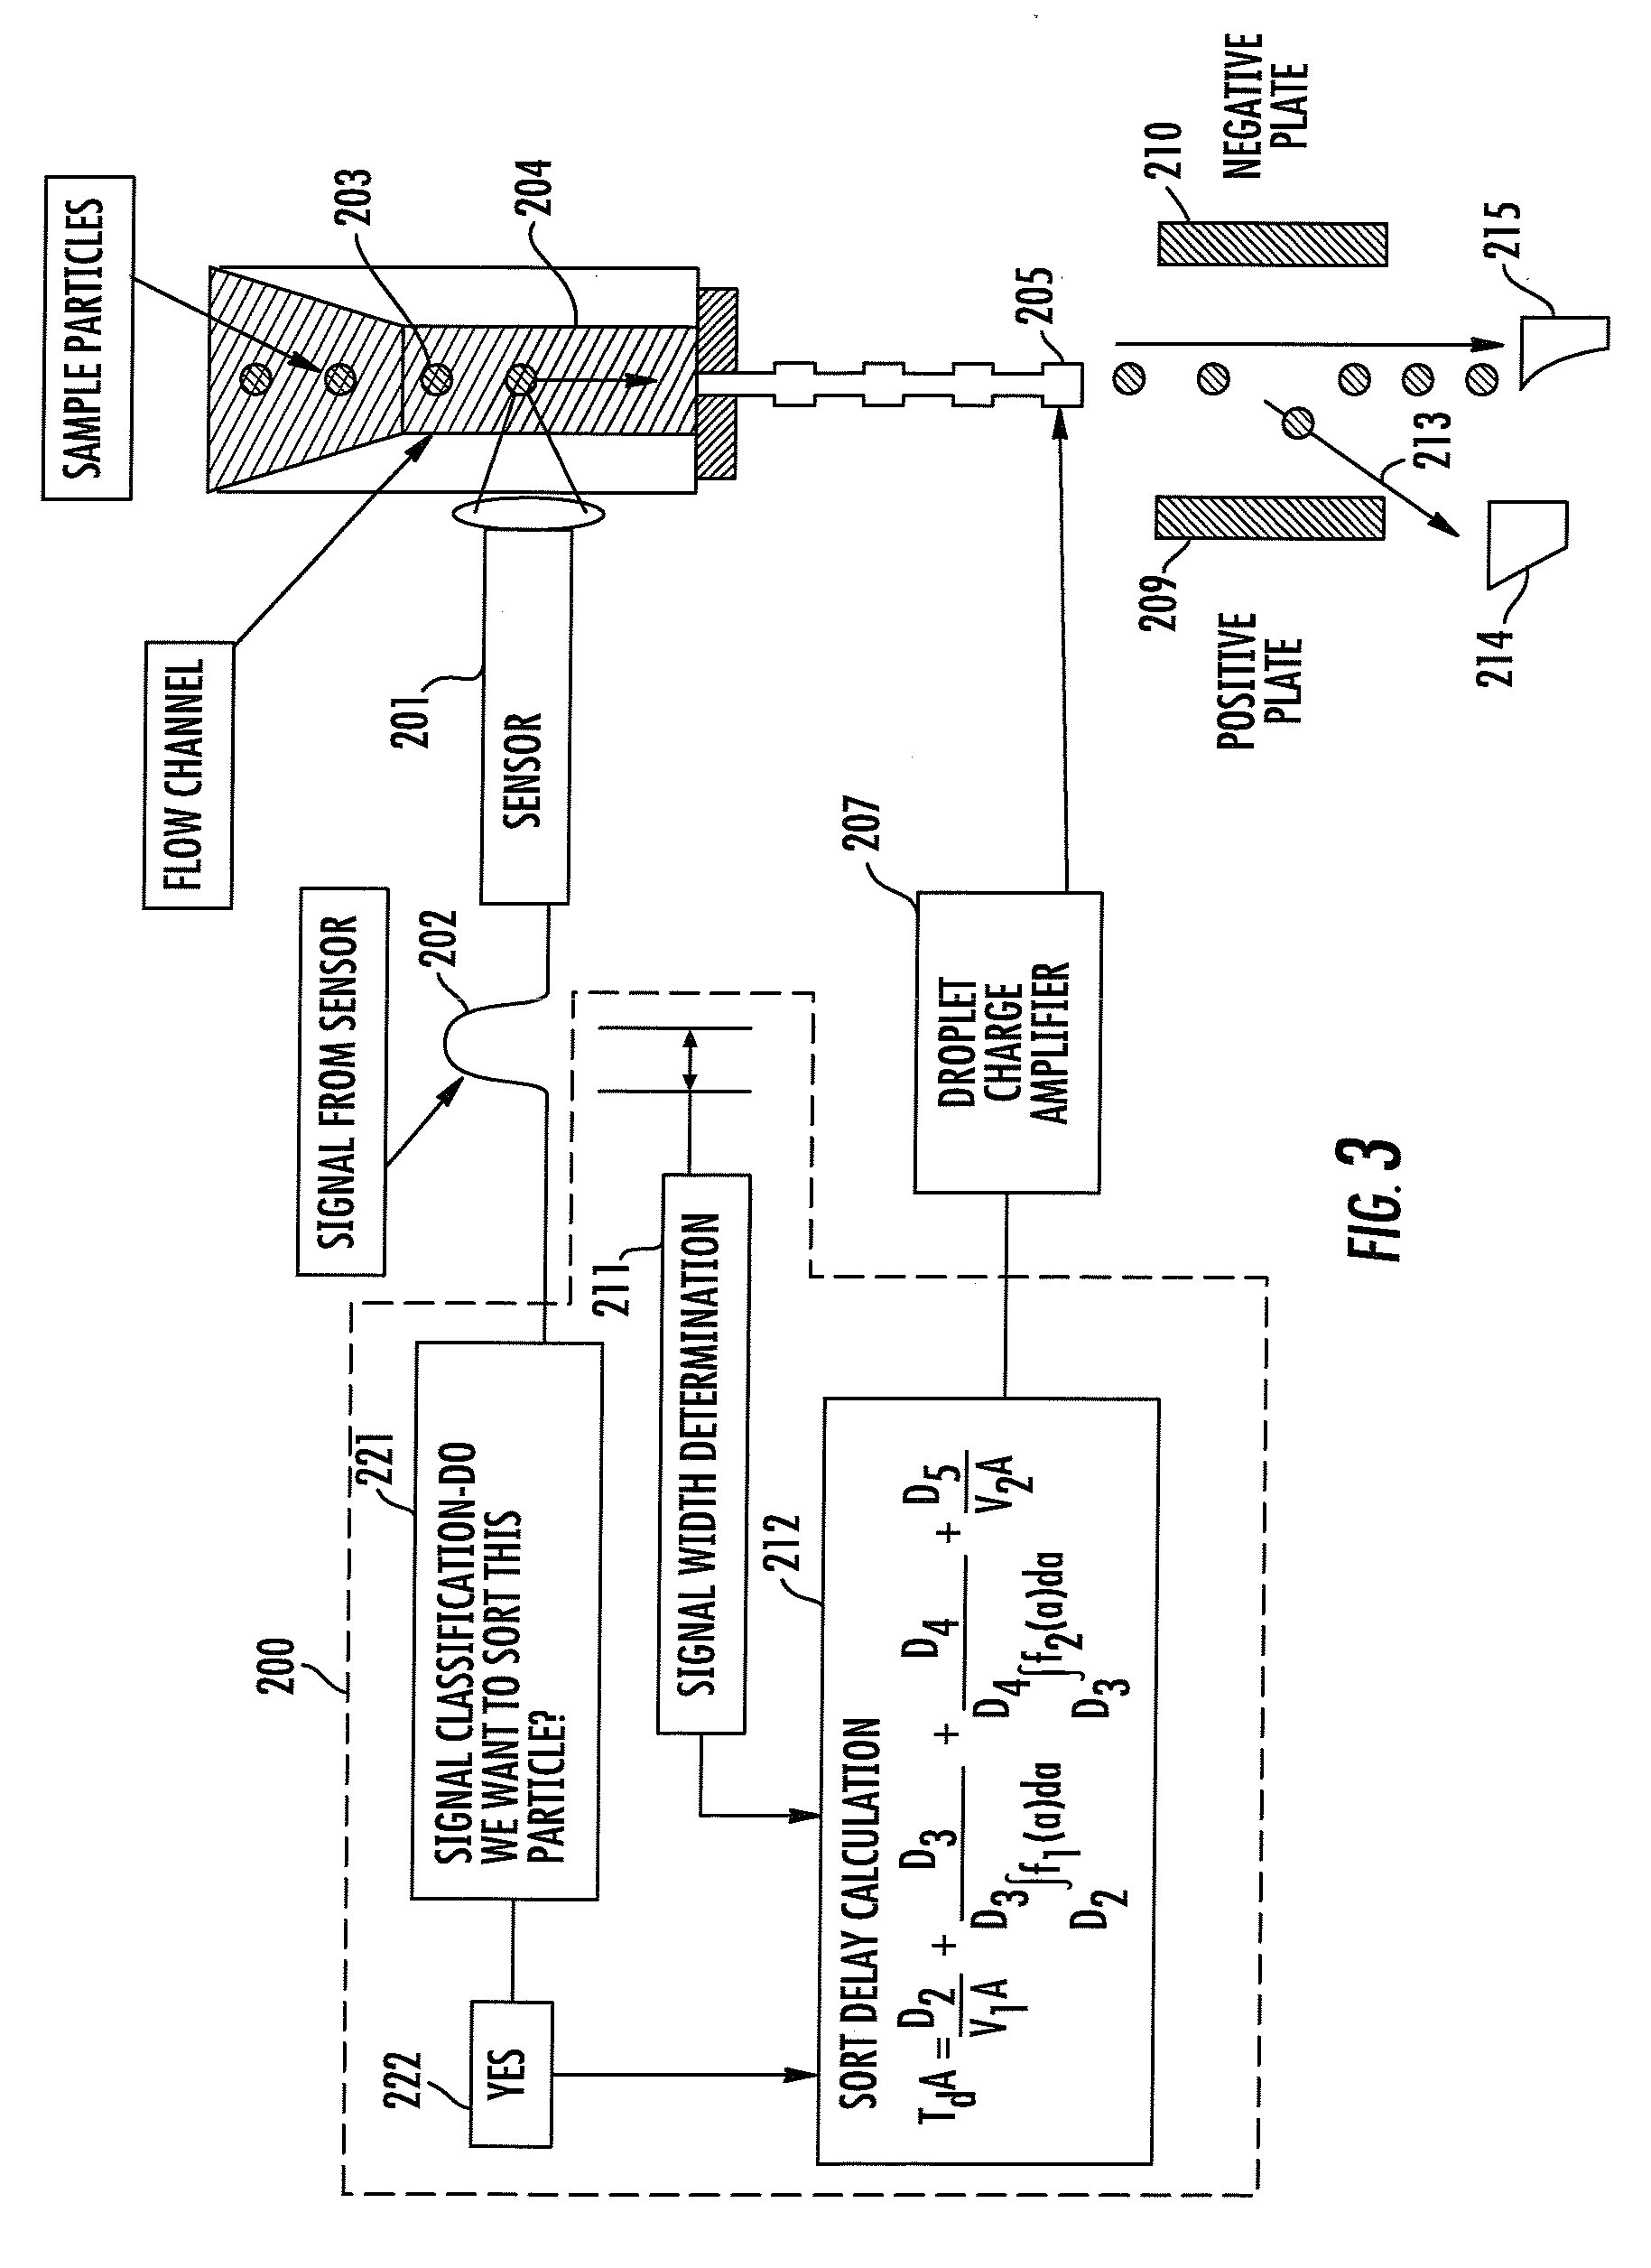 Method And Apparatus For Compensating For Variations In Particle Trajectories In Electrostatic Sorter For Flowcell Cytometer